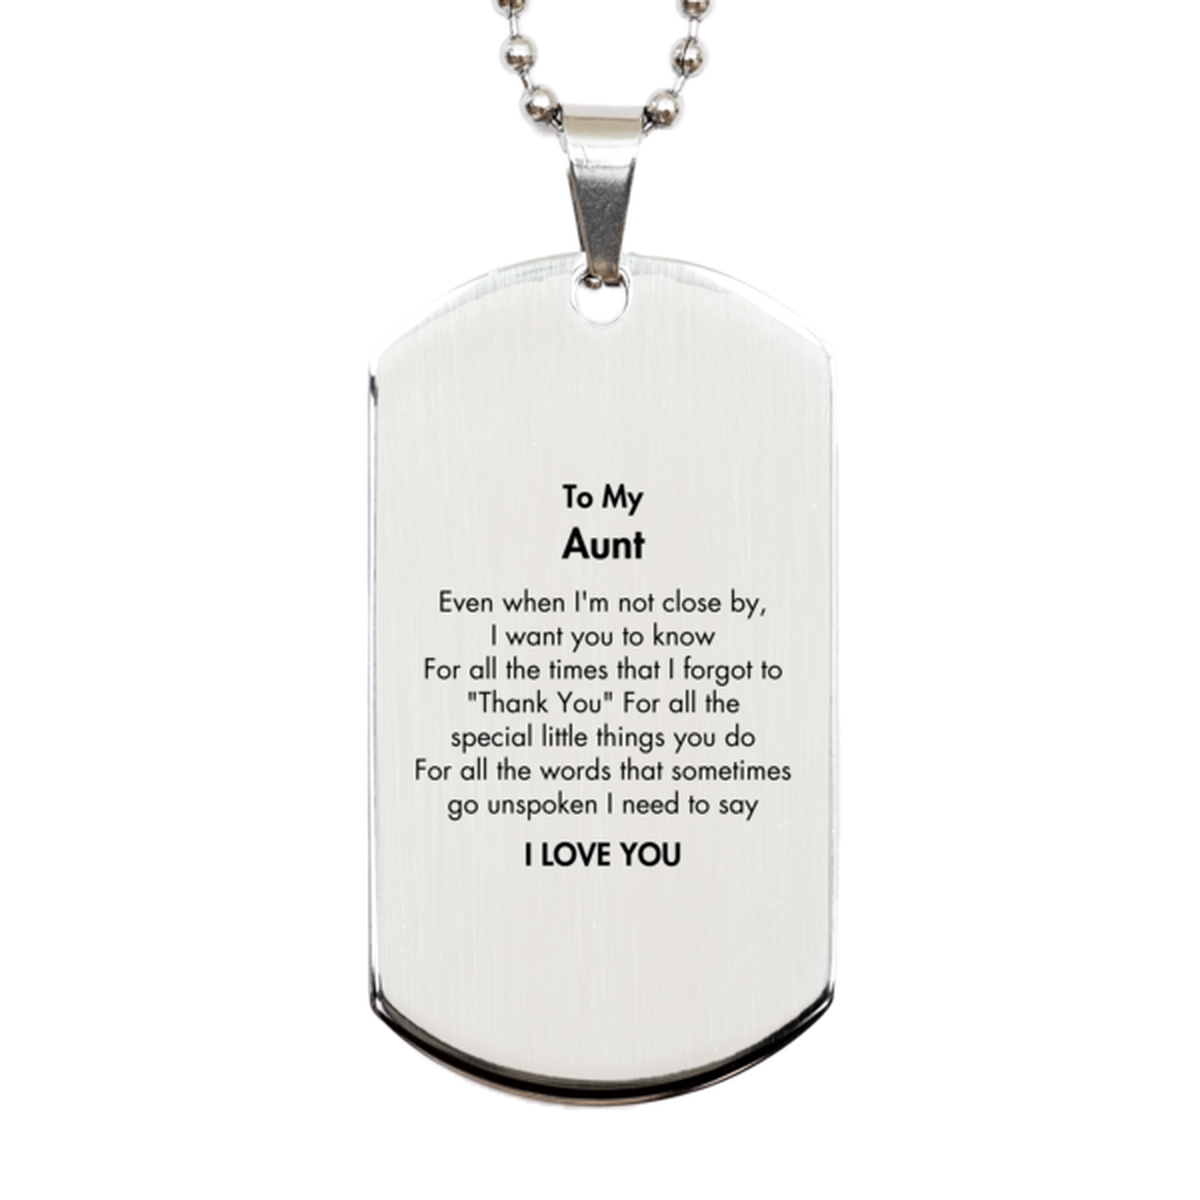 Thank You Gifts for Aunt, Keepsake Silver Dog Tag Gifts for Aunt Birthday Mother's day Father's Day Aunt For all the words That sometimes go unspoken I need to say I LOVE YOU